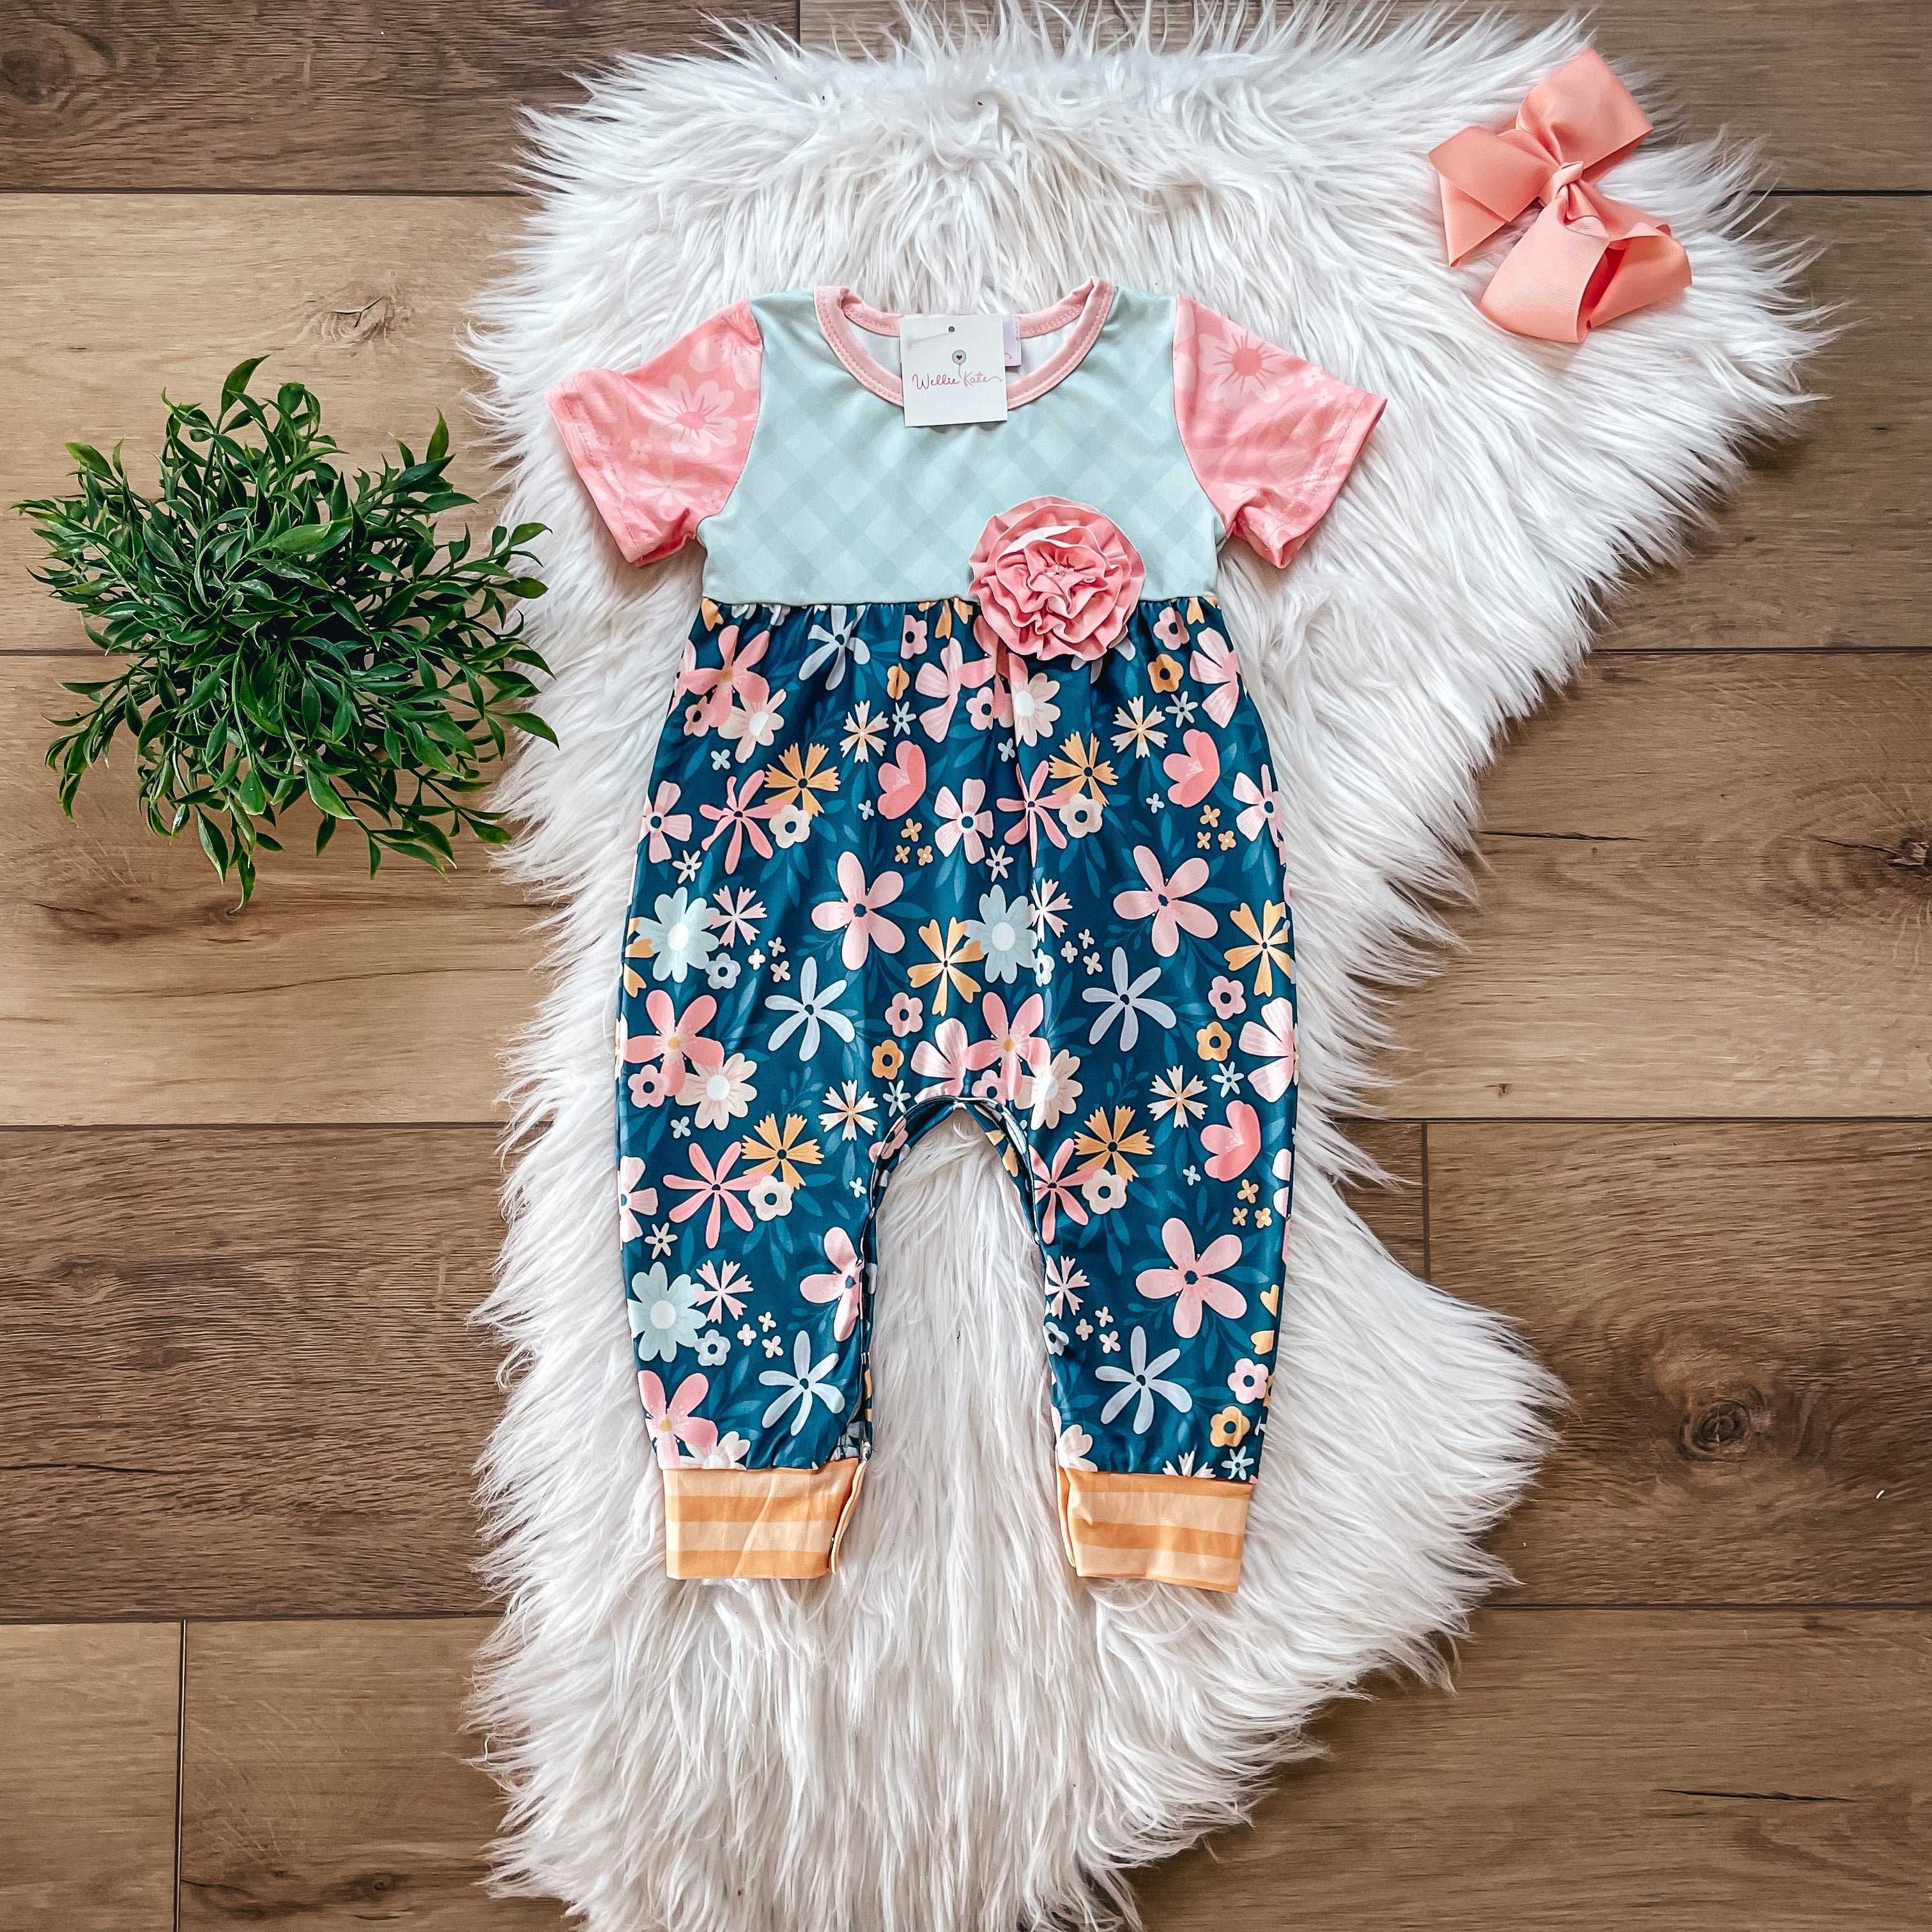 Whimsical Garden Baby Romper by Wellie Kate